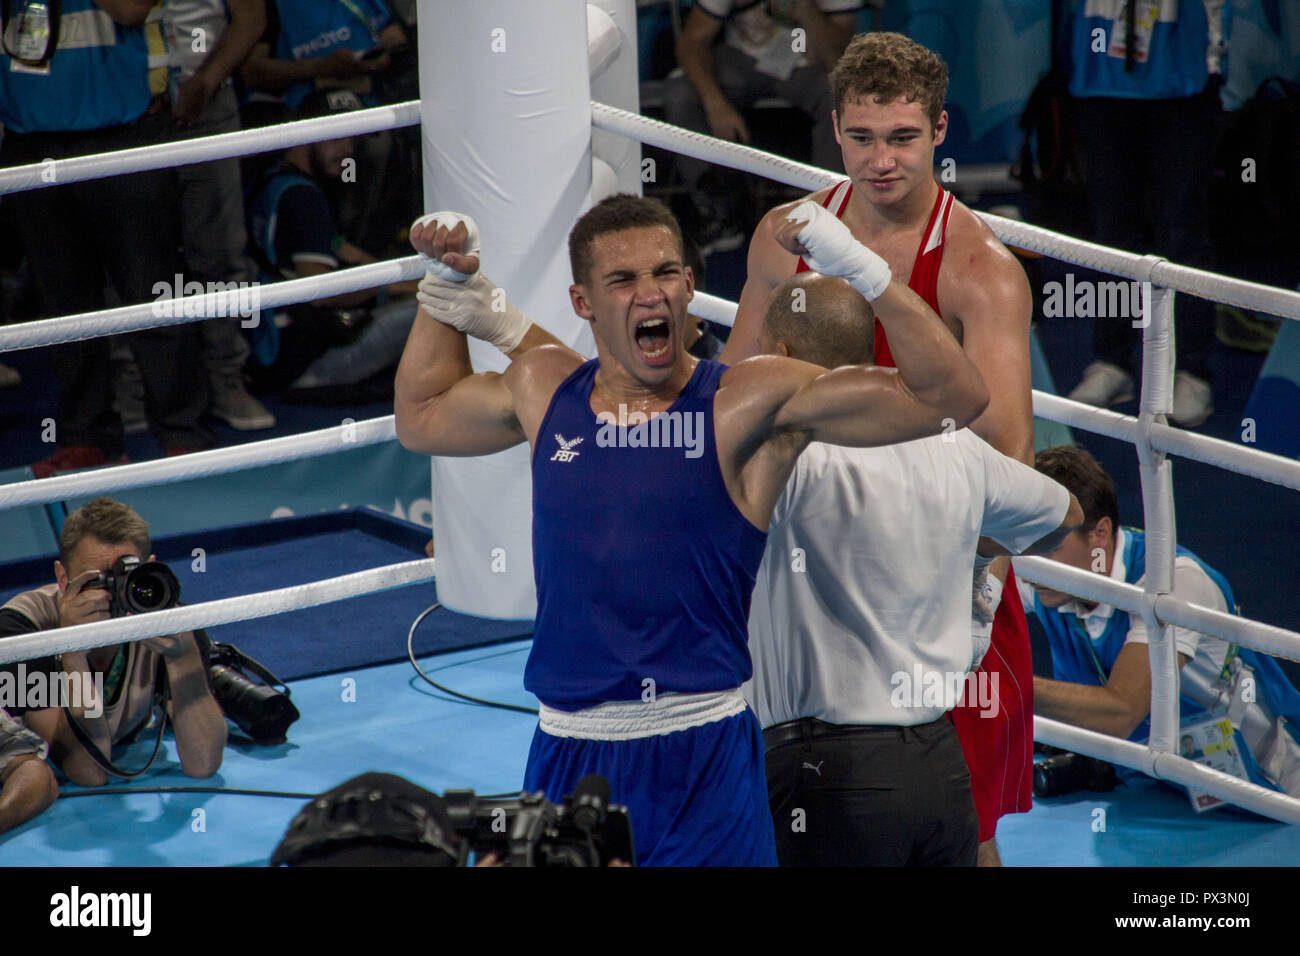 Buenos Aires, Buenos Aires, Argentina. 18th Oct, 2018. The British boxer  Itauma Karol won the gold medal of the Men's Lightweight Weights (81 kg),  in the Youth Olympic Games, Buenos Aires 2018,